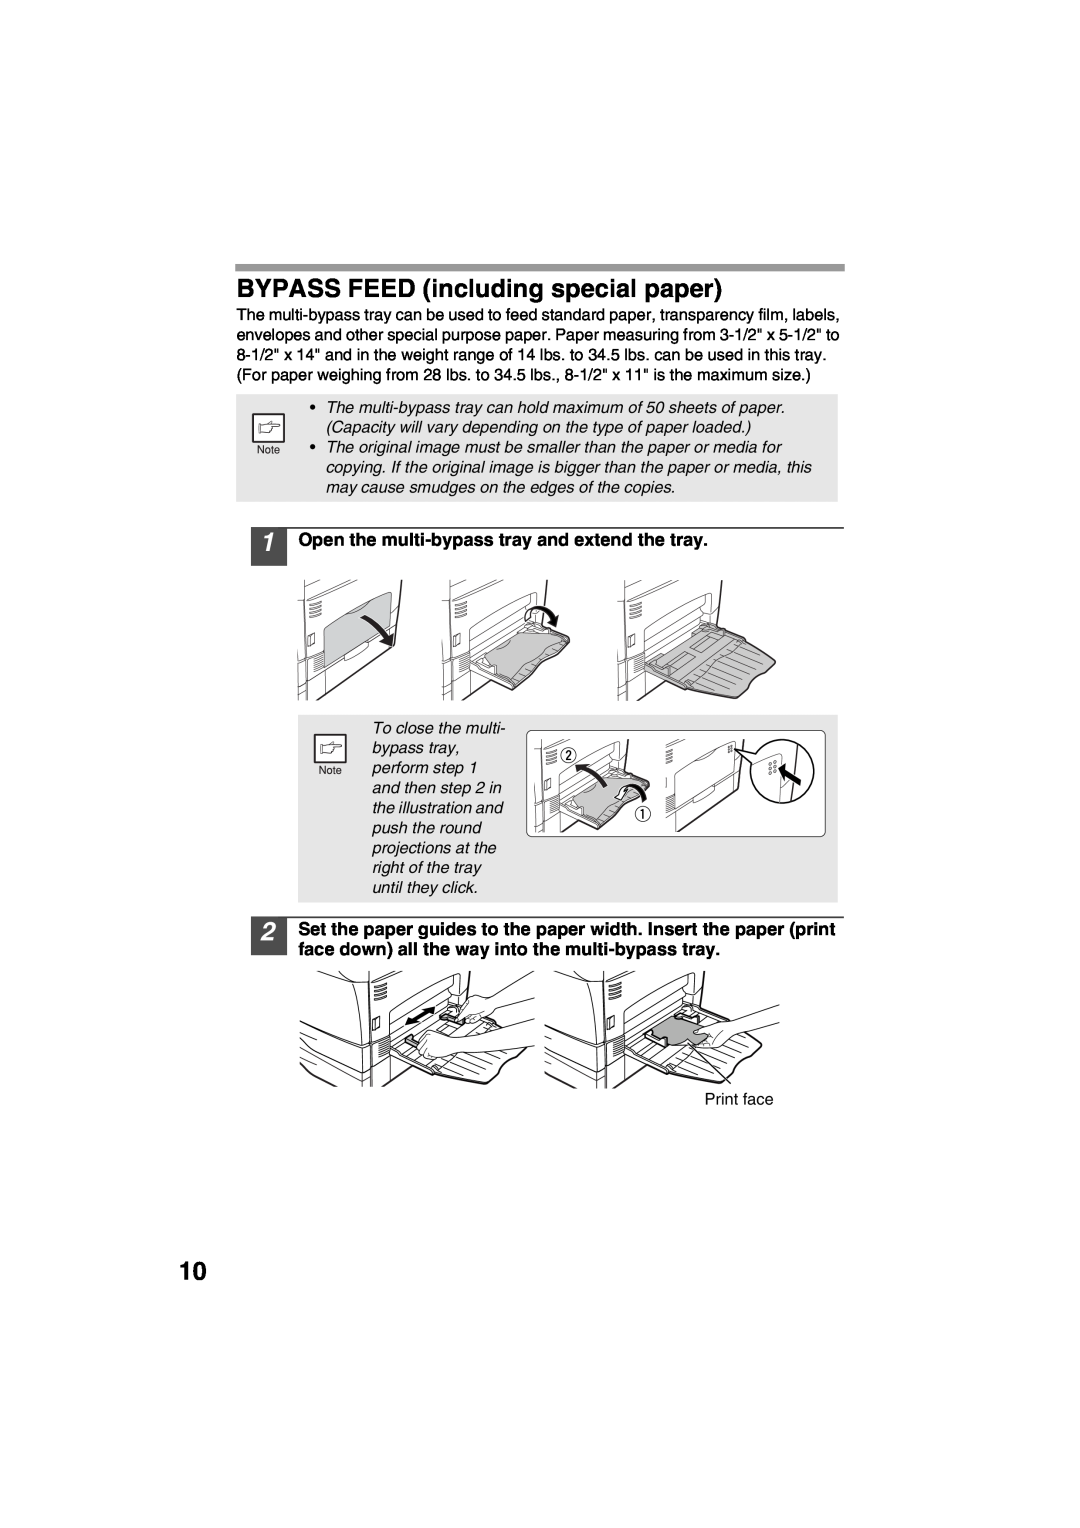 Sharp AR-153E, AR-157E operation manual BYPASS FEED including special paper, Open the multi-bypass tray and extend the tray 